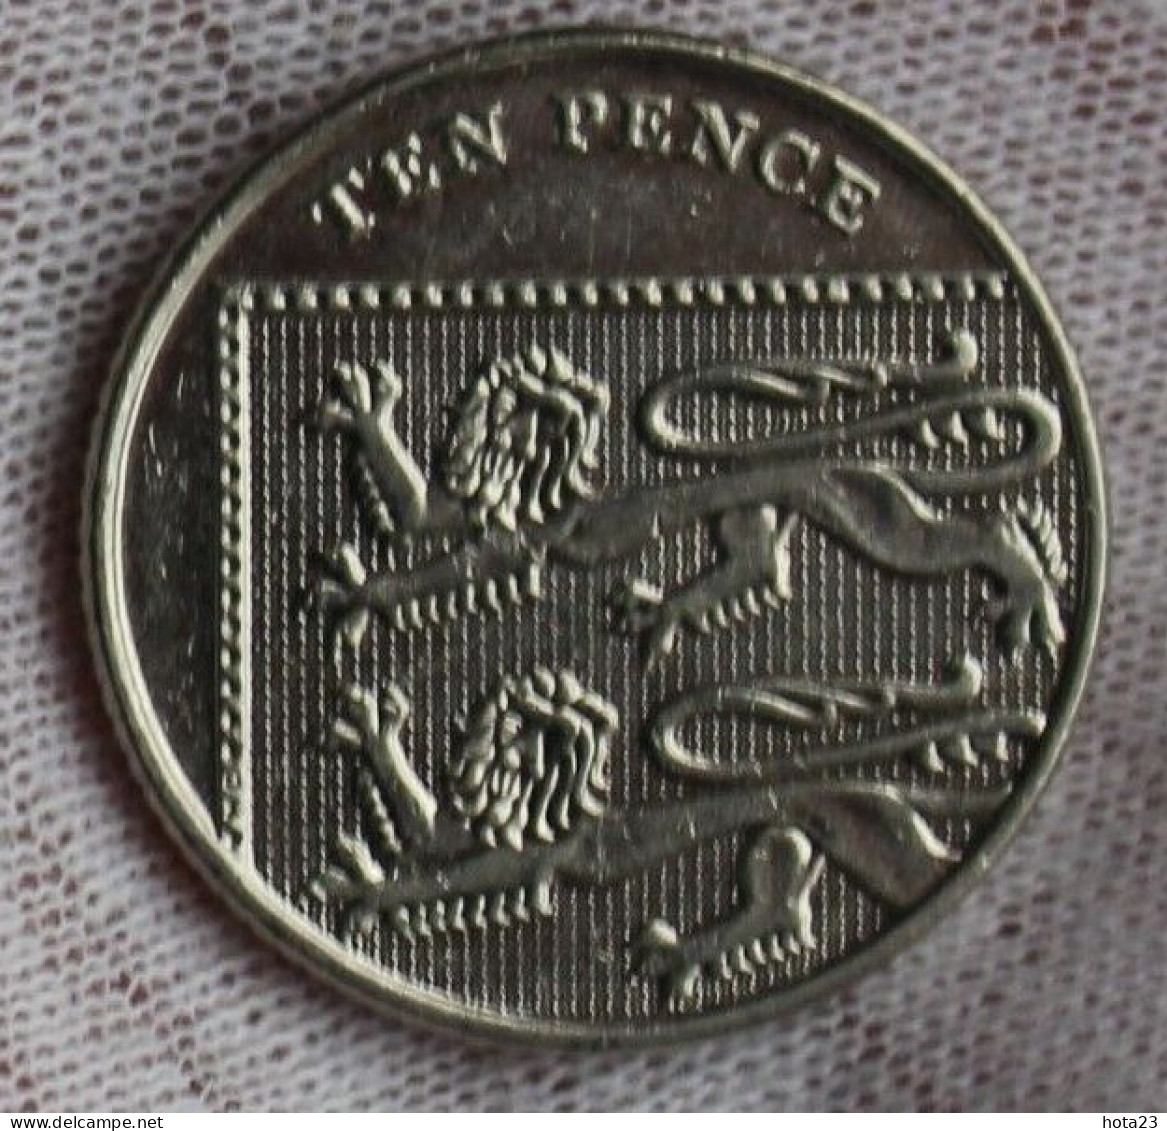 2015 10 Ten Pence; United Kingdom; England; Great Britain; Circulated - 10 Pence & 10 New Pence